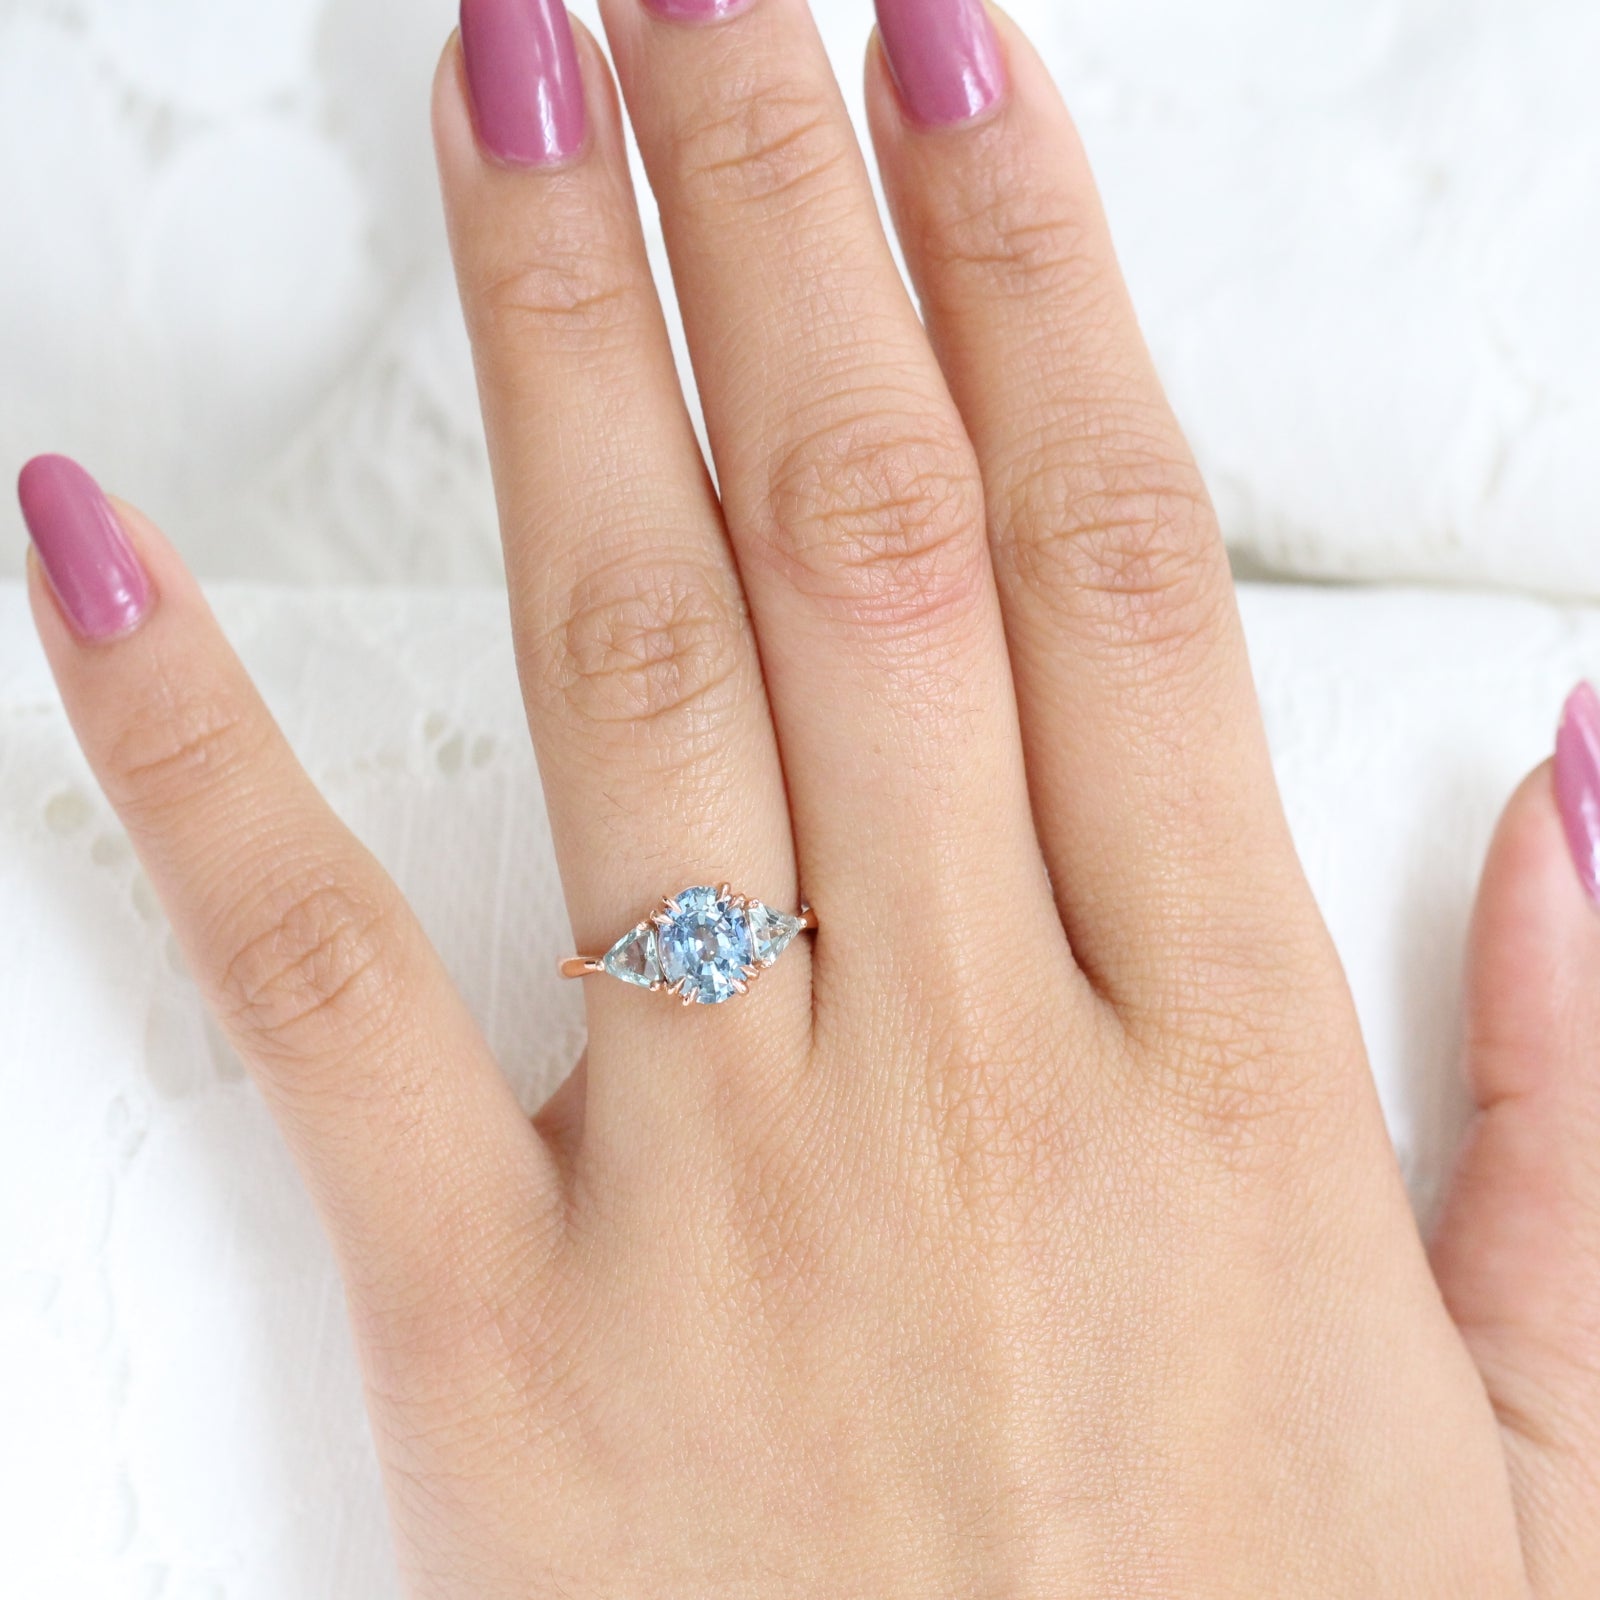 Oval Aqua Blue Sapphire Engagement Ring in Rose Gold 3 Stone Ring by La More Design Jewelry